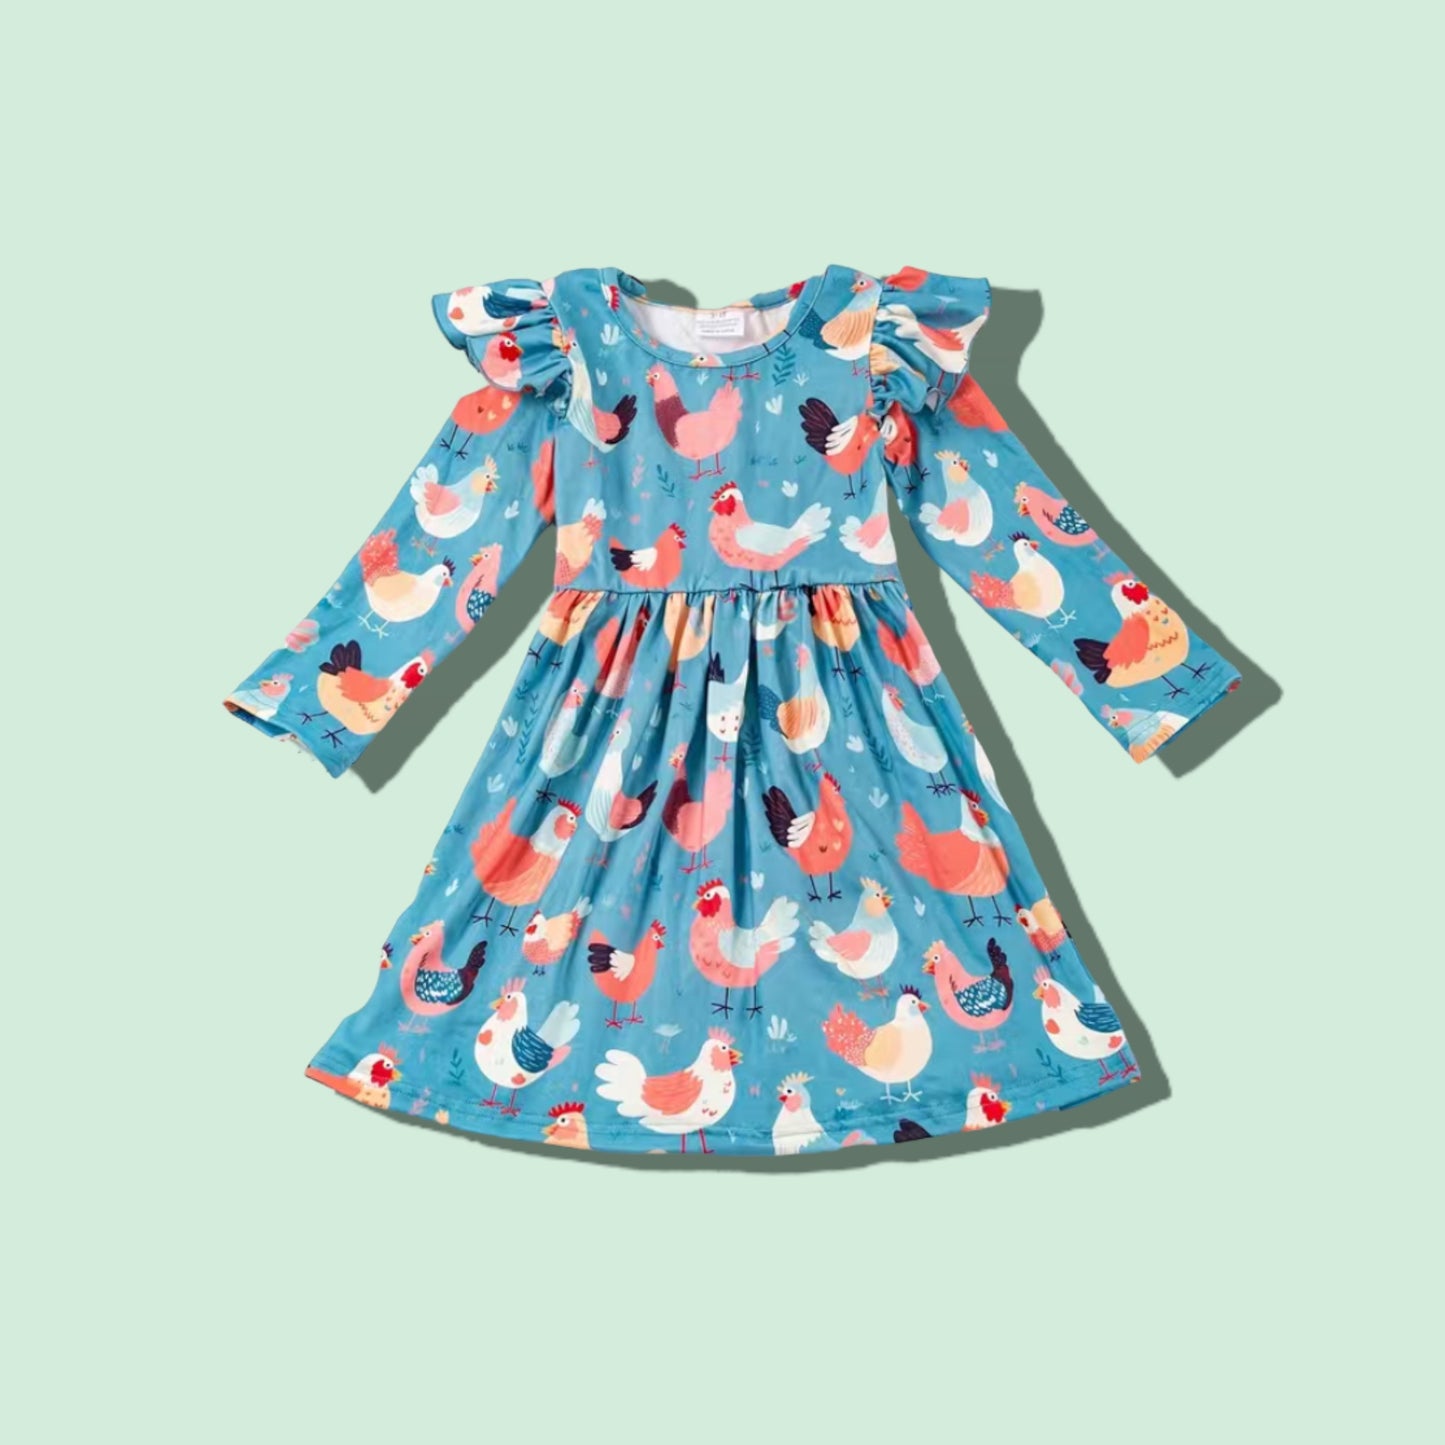 Feathered Frock Girls Dress